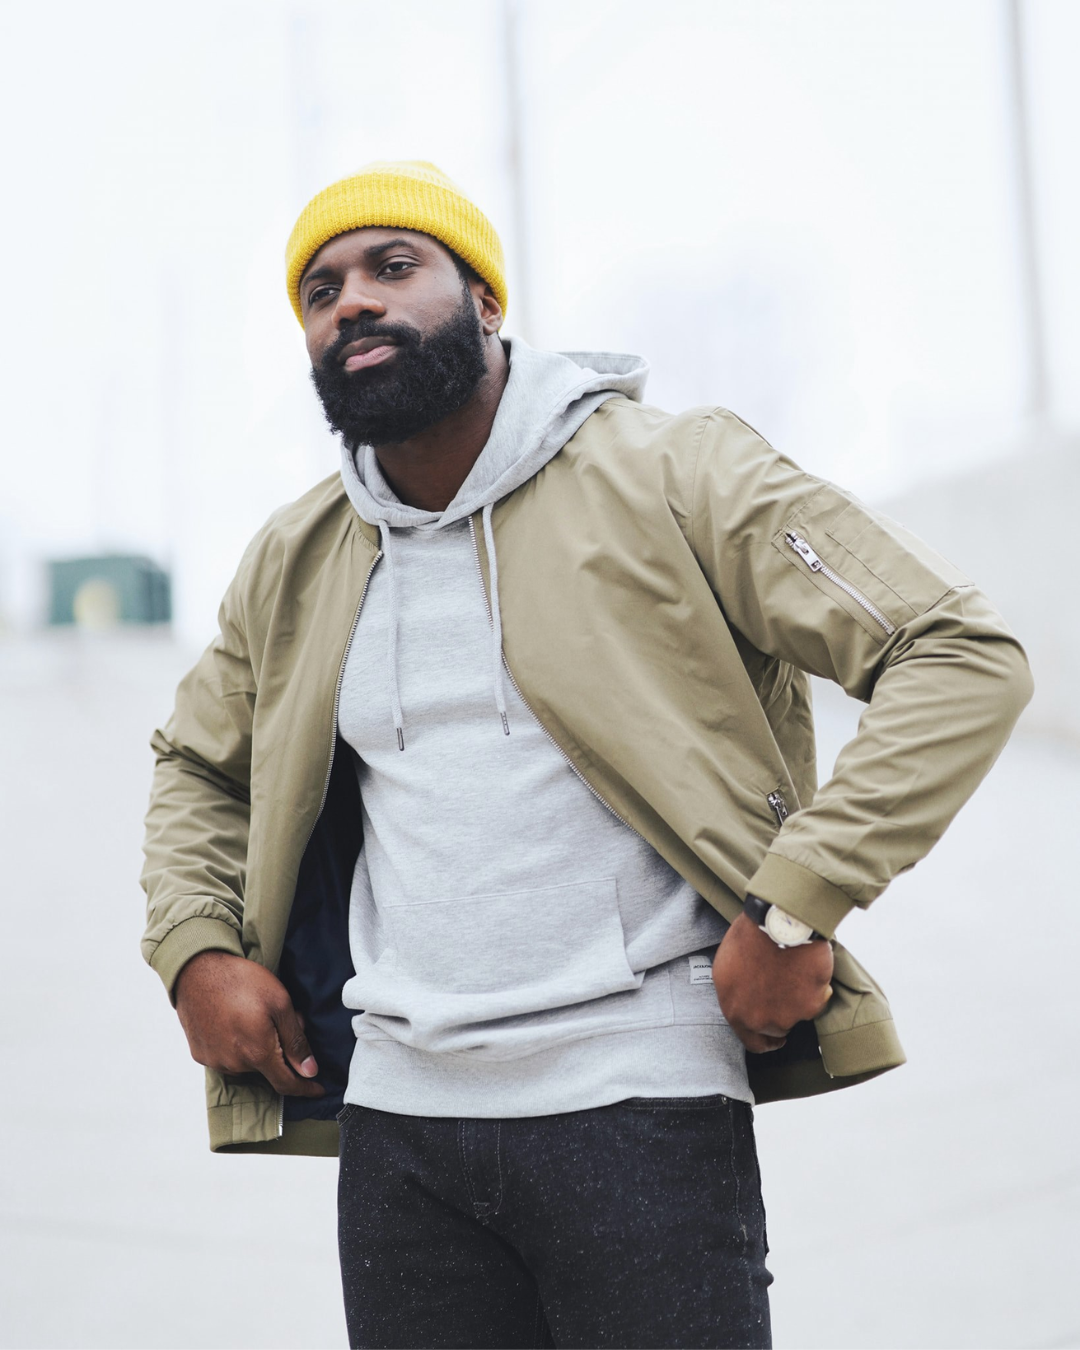 a person in a yellow beanie and jacket